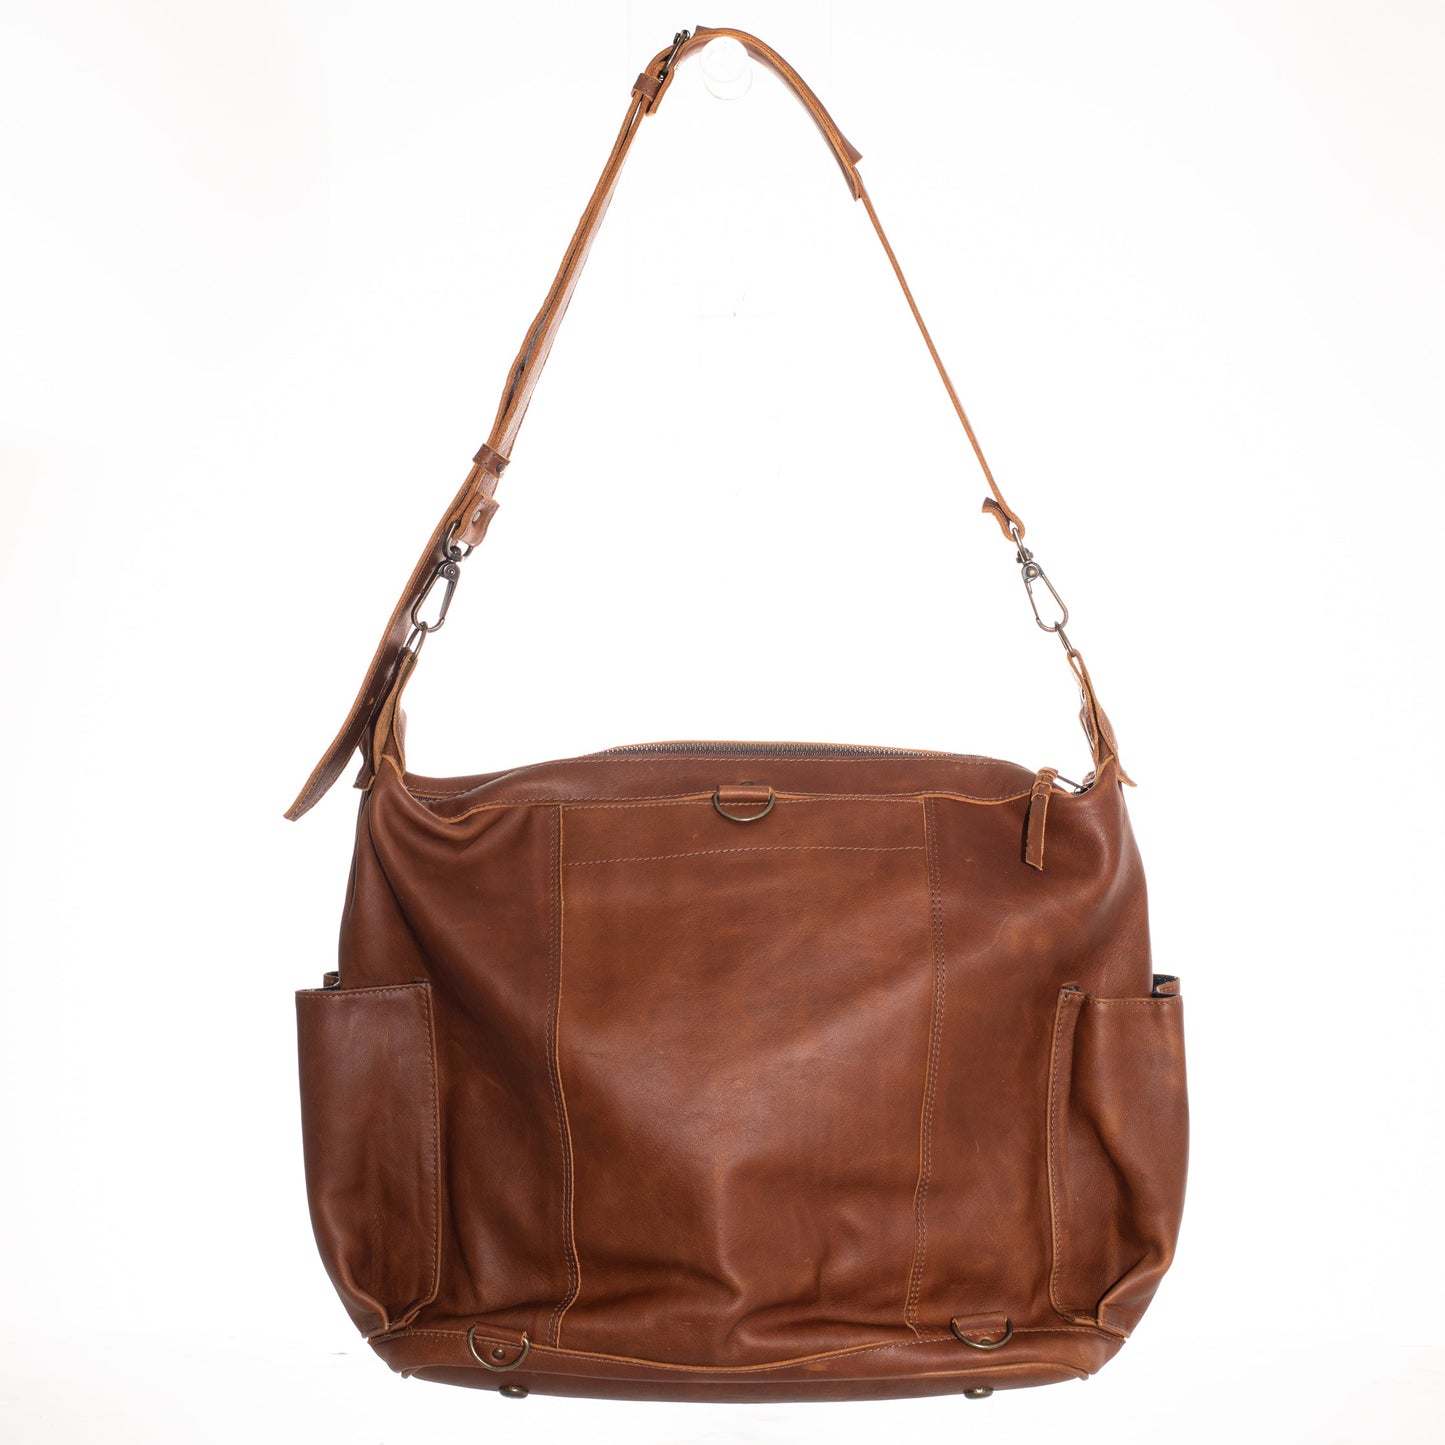 BEATRIZ CONVERTIBLE DAY BAG - FULL LEATHER - CAFE